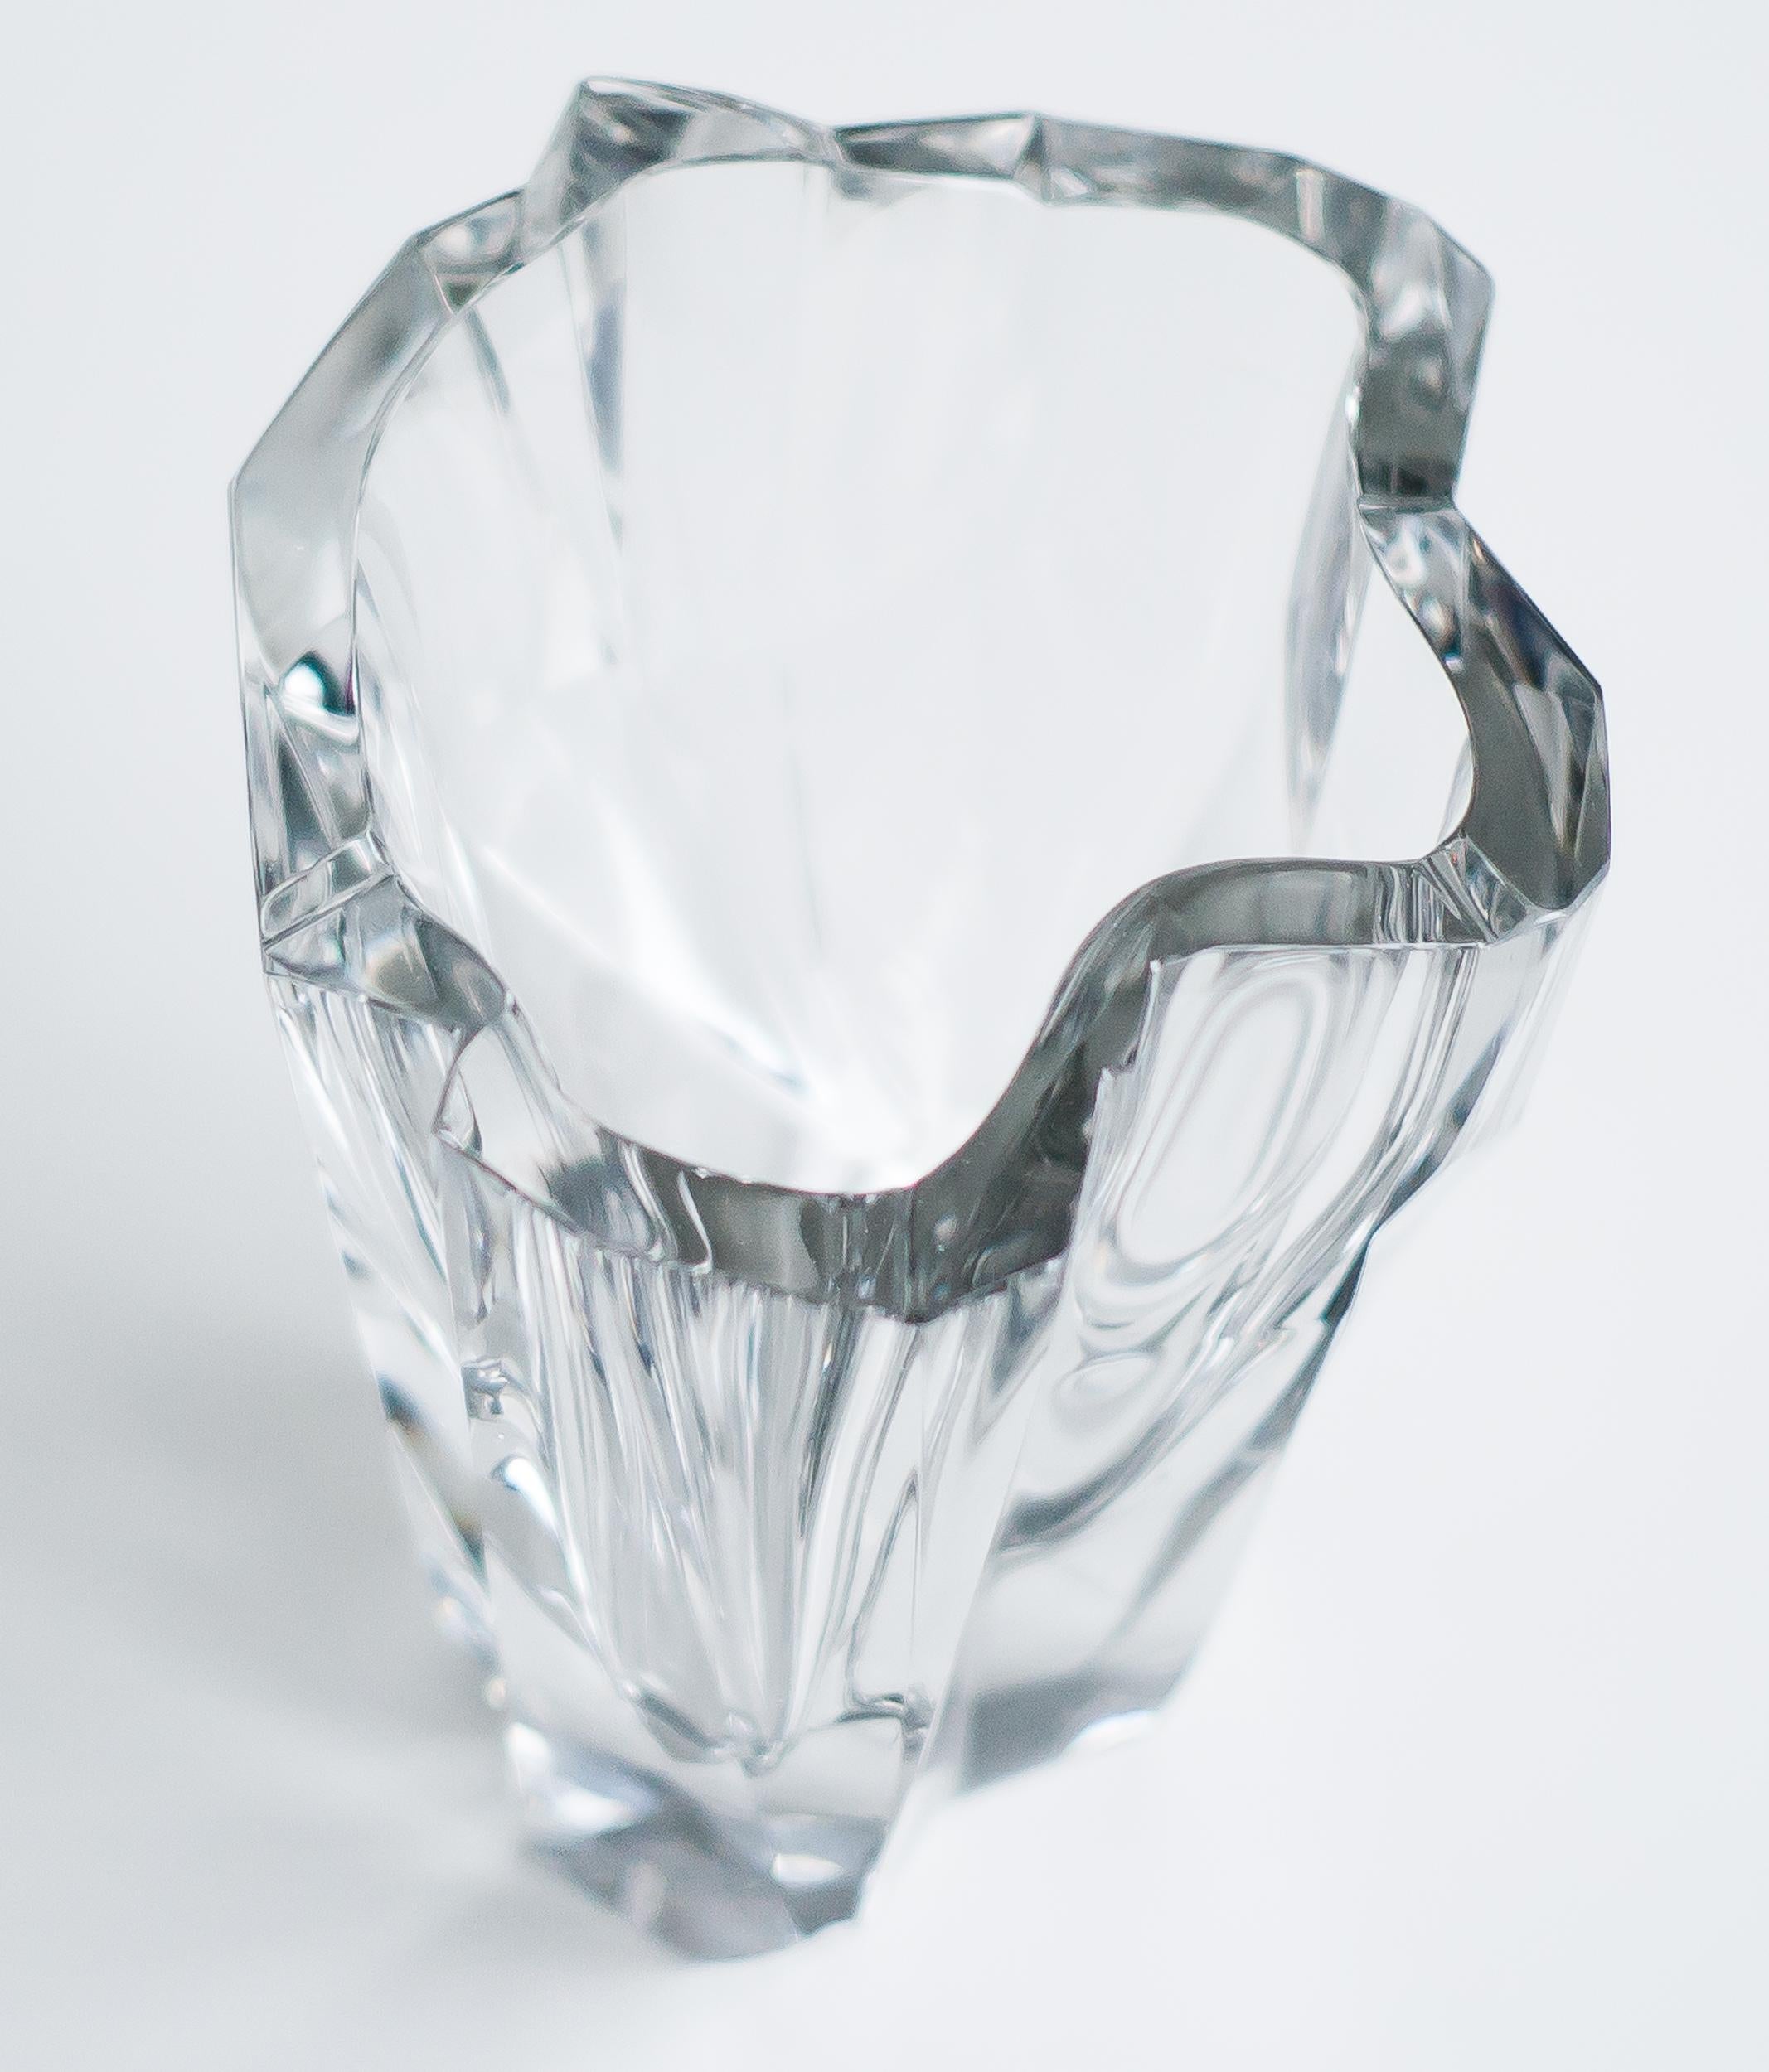 Iconic still-mould blown crystal glass vase designed by Tapio Wirkkala. 
Produced by Iittala, Finland. 
Signed and numbered at the bottom.

The oeuvre of Tapio Wirkkala, Finland's internationally best-known designer, belongs to the everyday